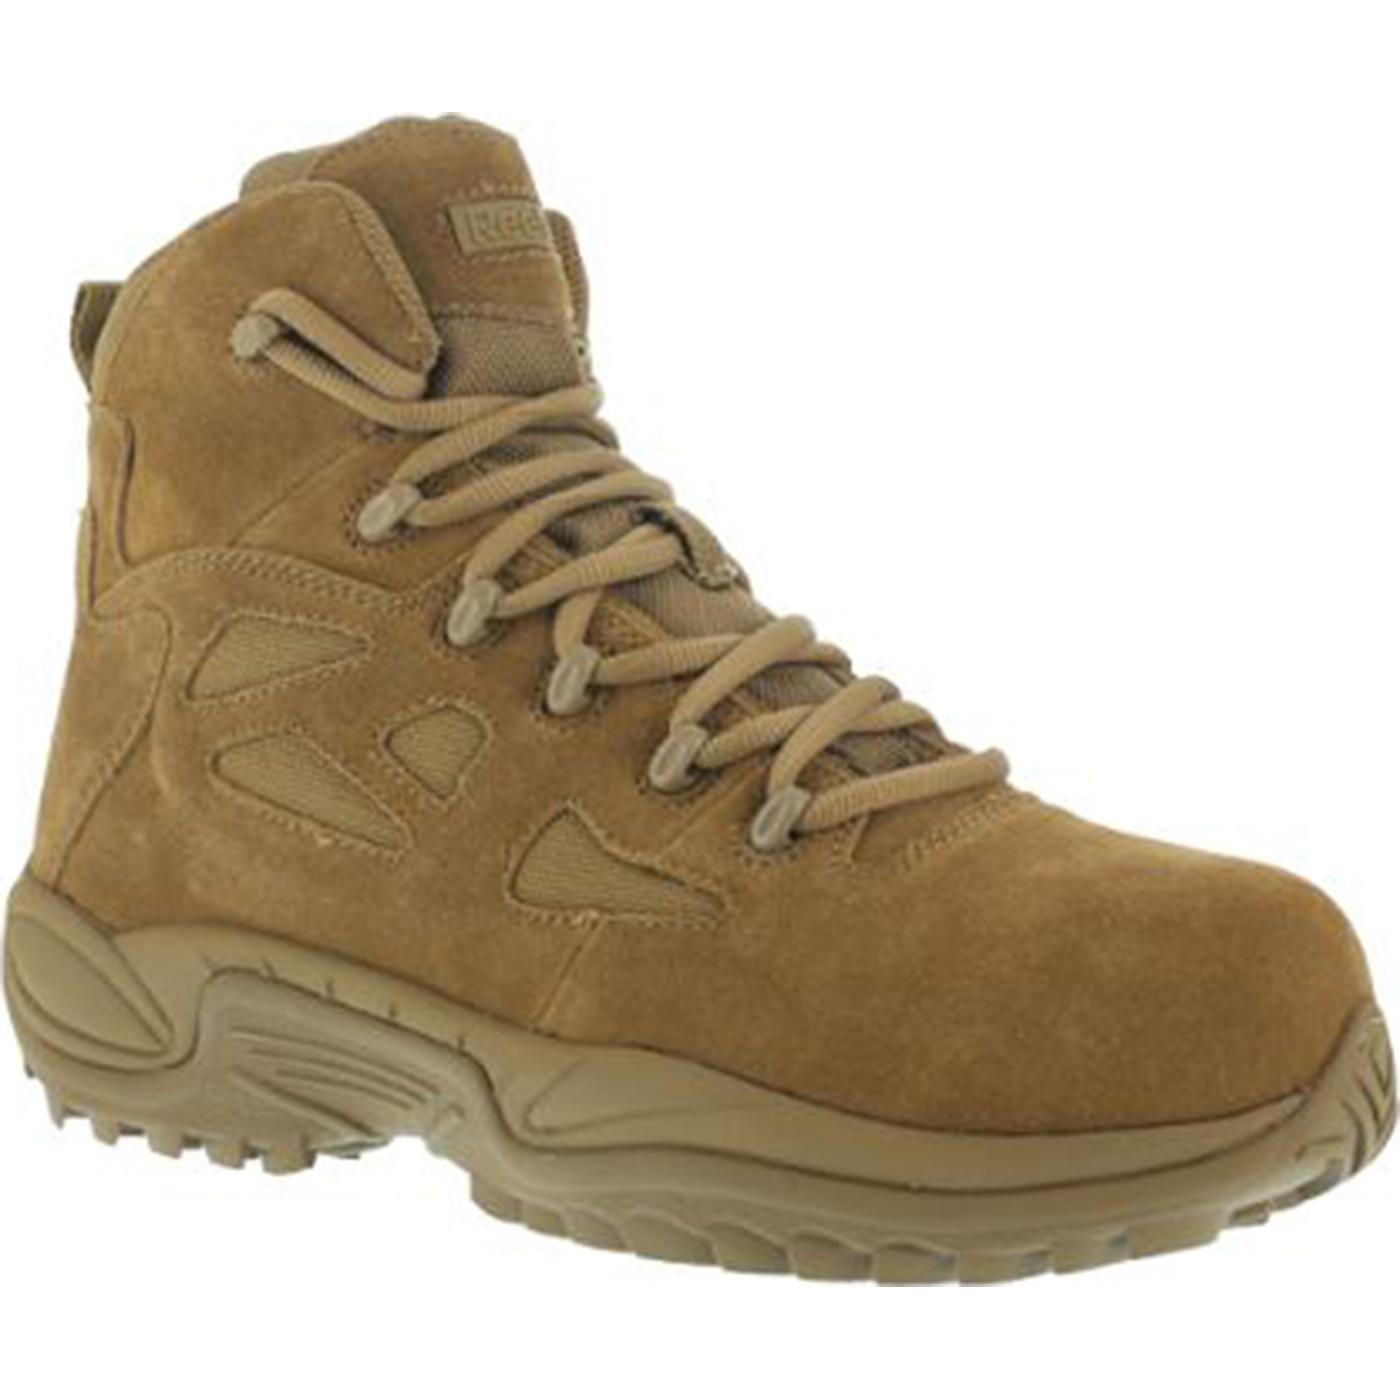 Reebok Rapid Response Composite Toe Tactical Duty Boot Size 9(W) - image 1 of 4